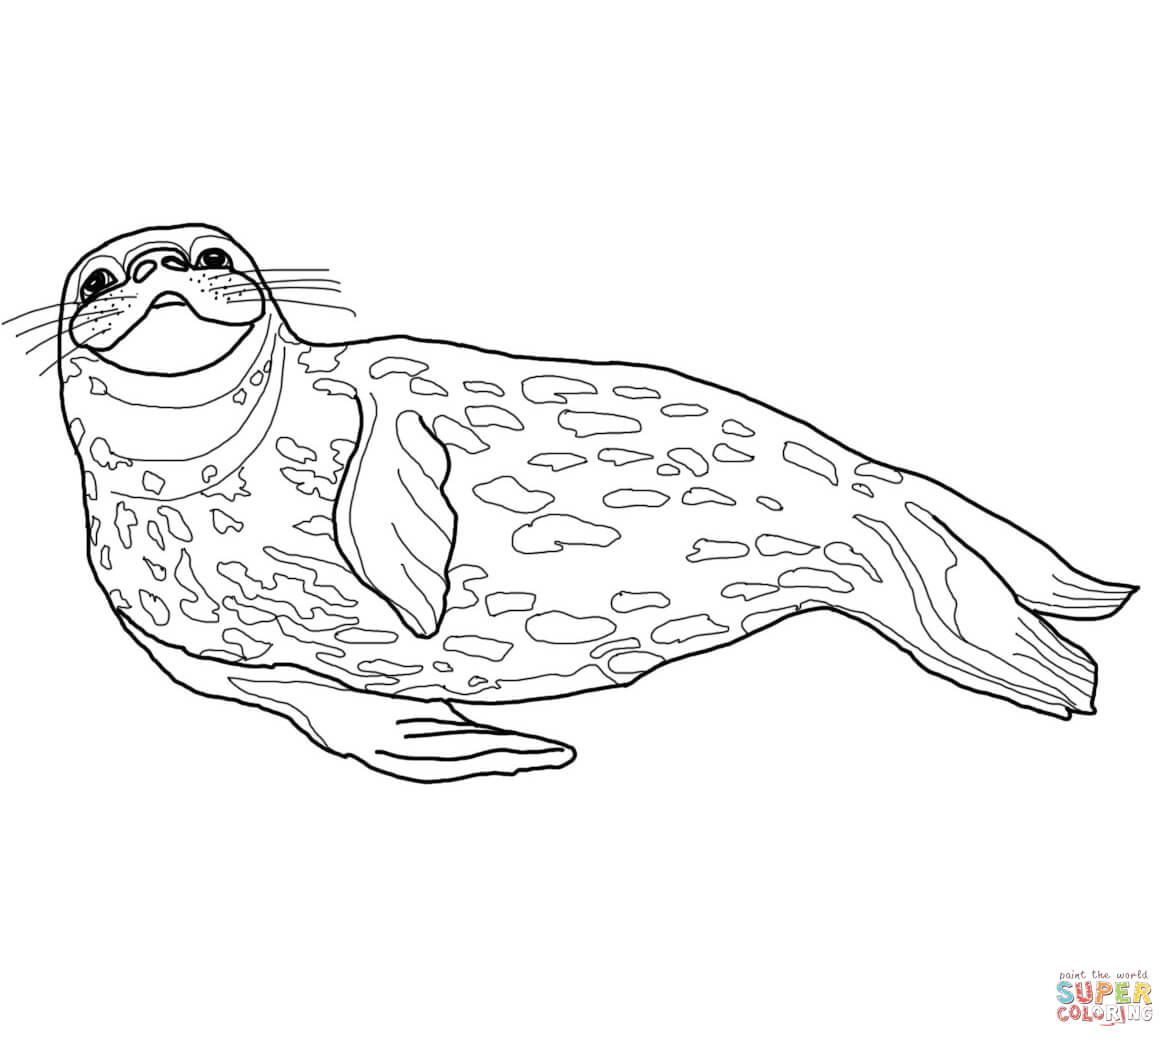 Weddell Seal coloring page | Free Printable Coloring Pages